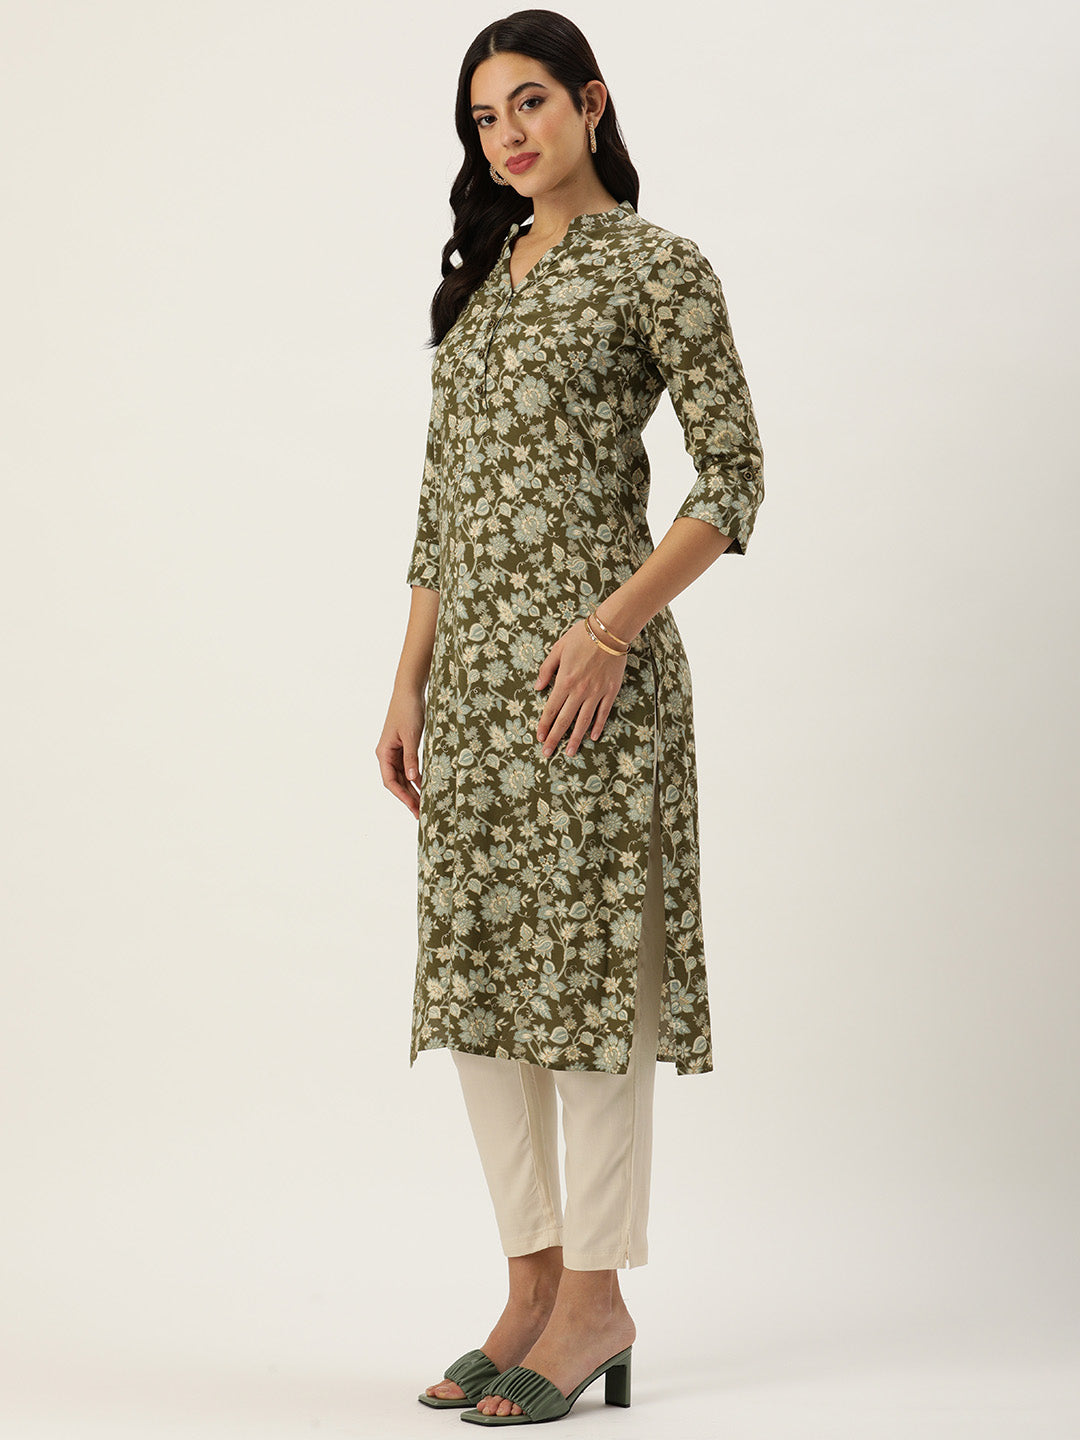 Olive Green Floral Printed Kurta with a pocket 